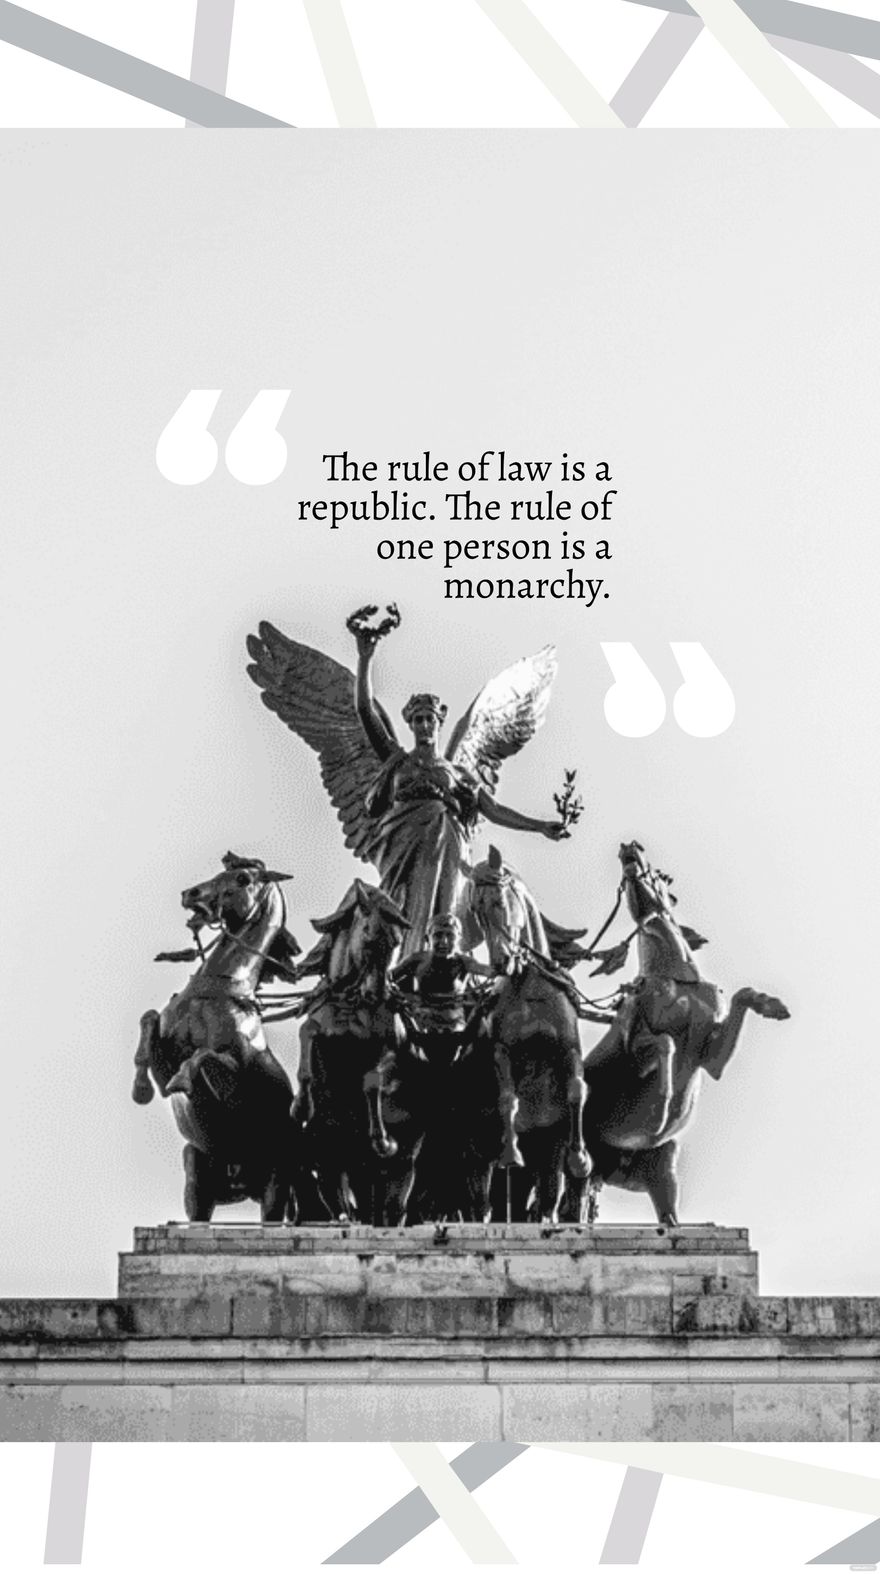 Free The rule of law is a republic. The rule of one person is a monarchy. - Lee Zeldin